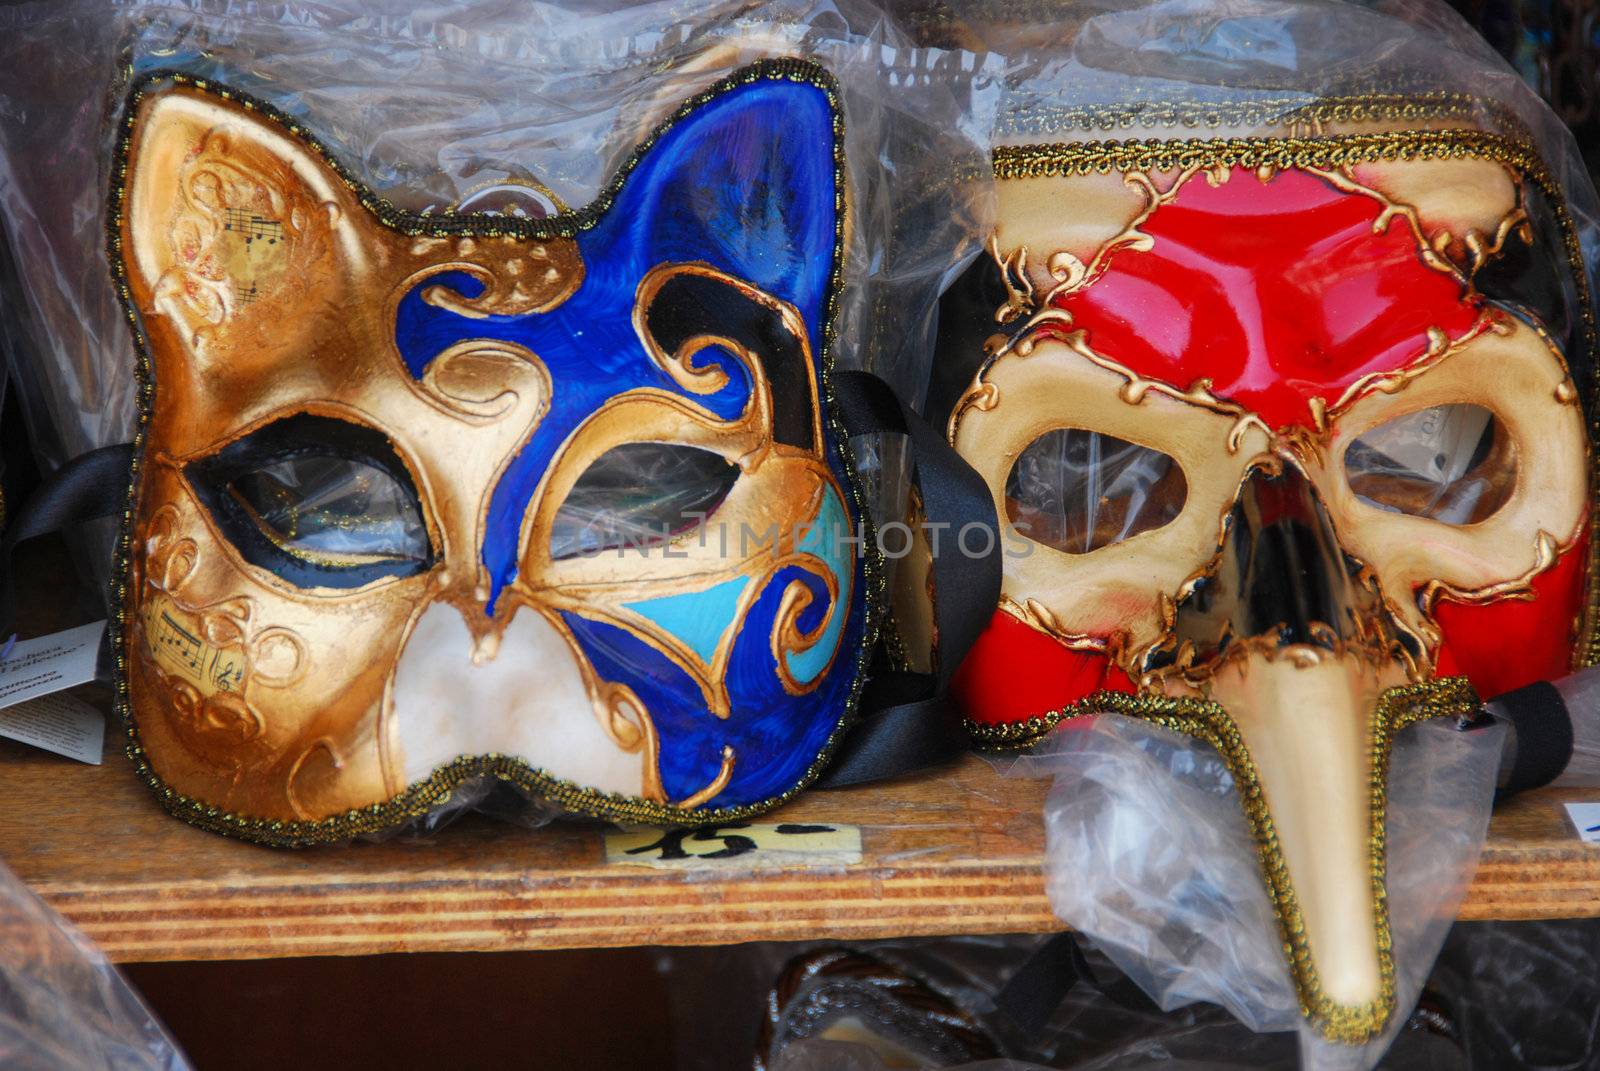 Venice Masks exposed in a market